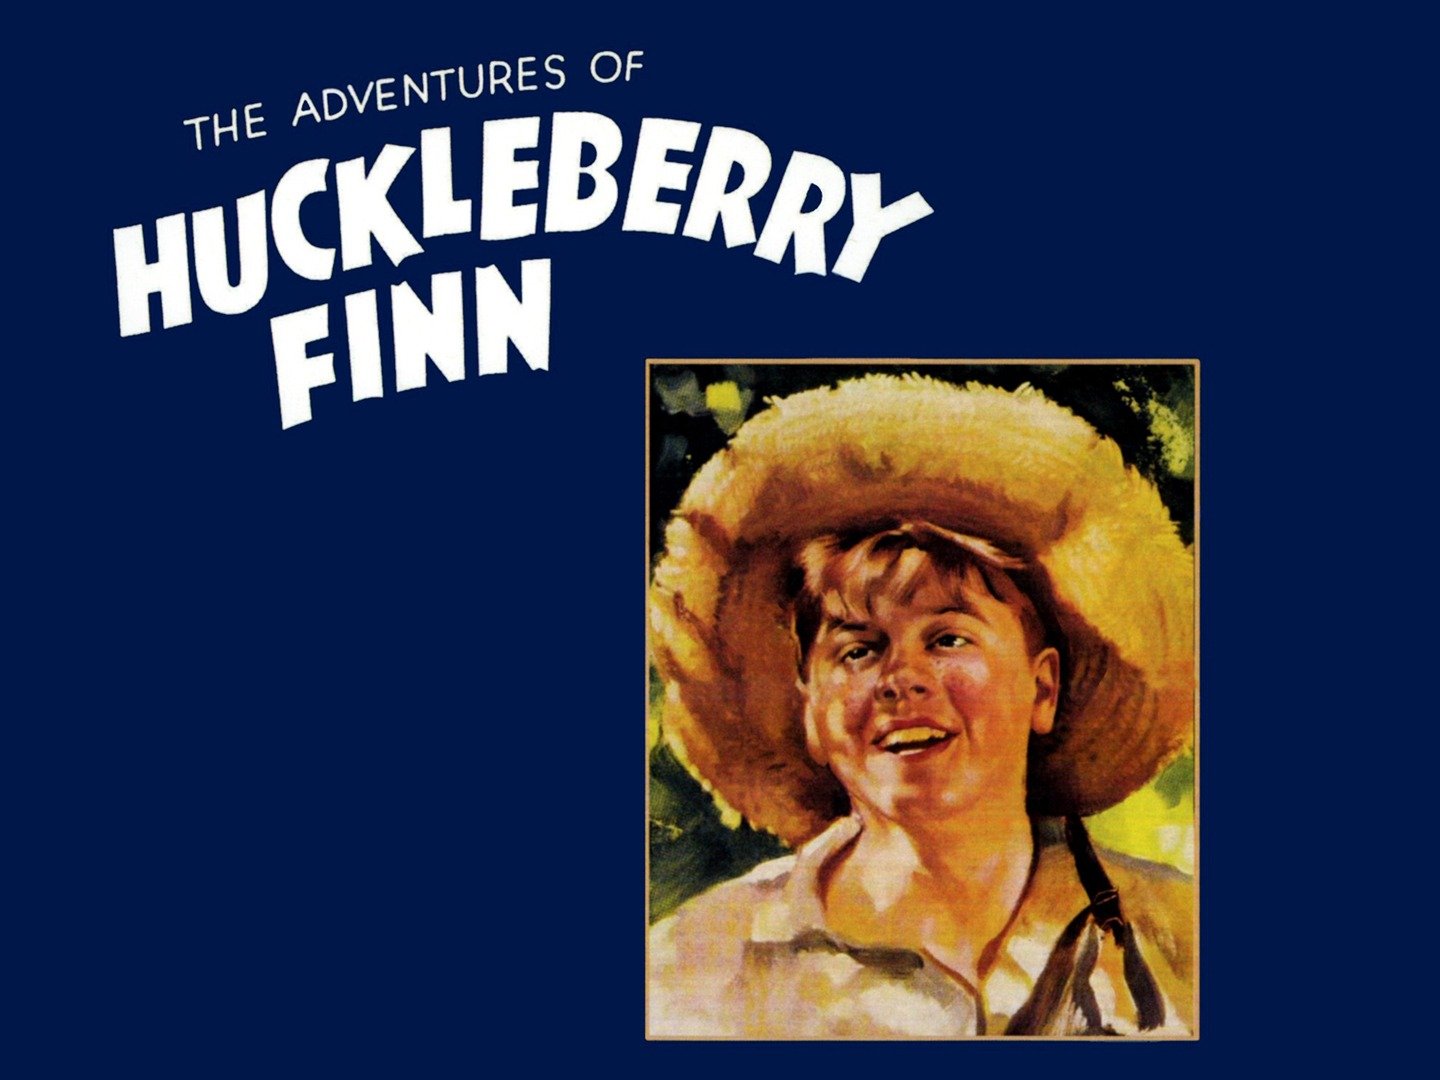 The Adventures of Huckleberry Finn download the new version for iphone